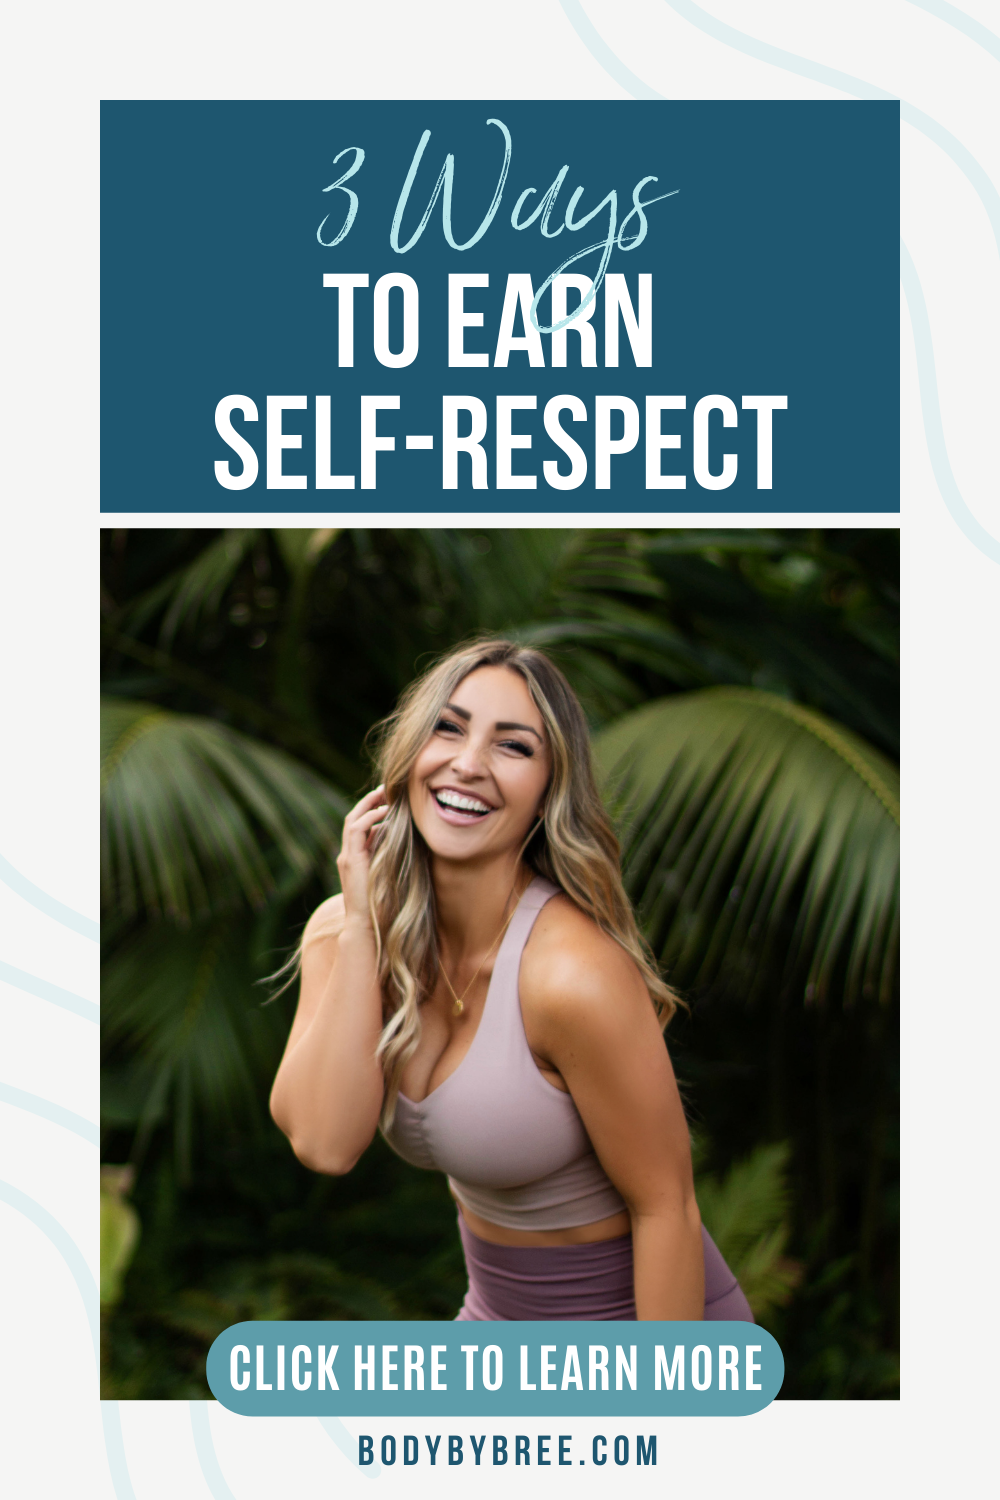 3 WAYS TO EARN SELF-RESPECT